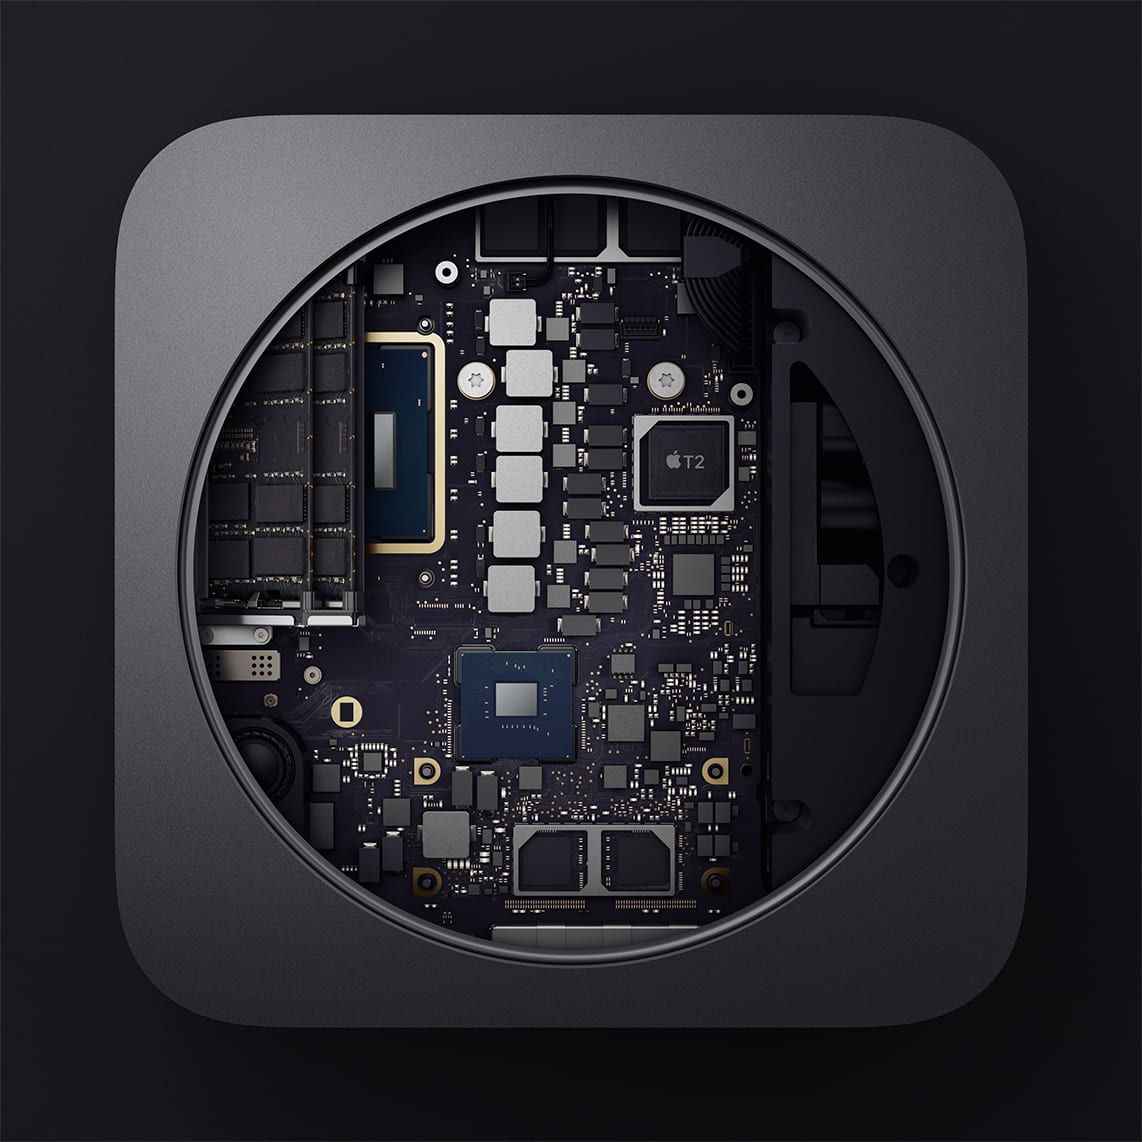 (The inside of the new Mac mini. Image courtesy of Apple)